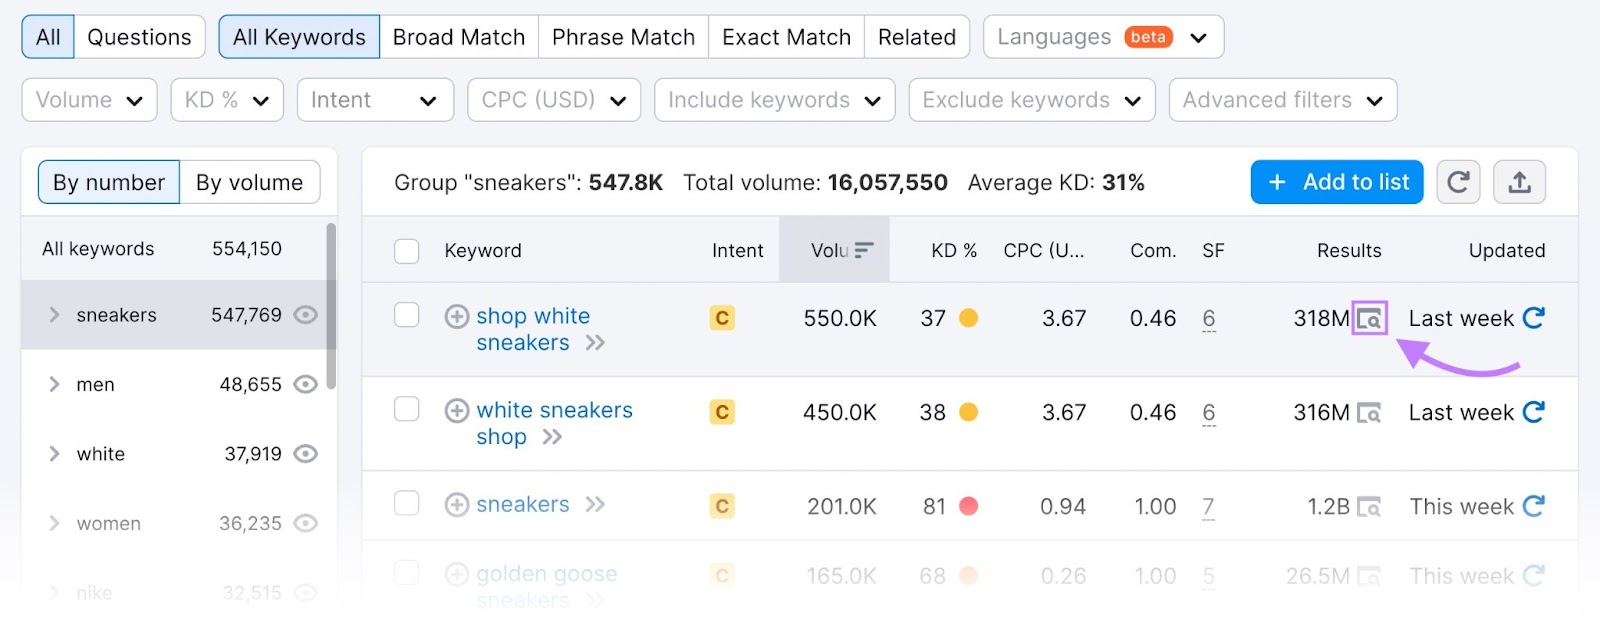 The search icon highlighted next to "shop white sneakers" keyword in the “Results” column